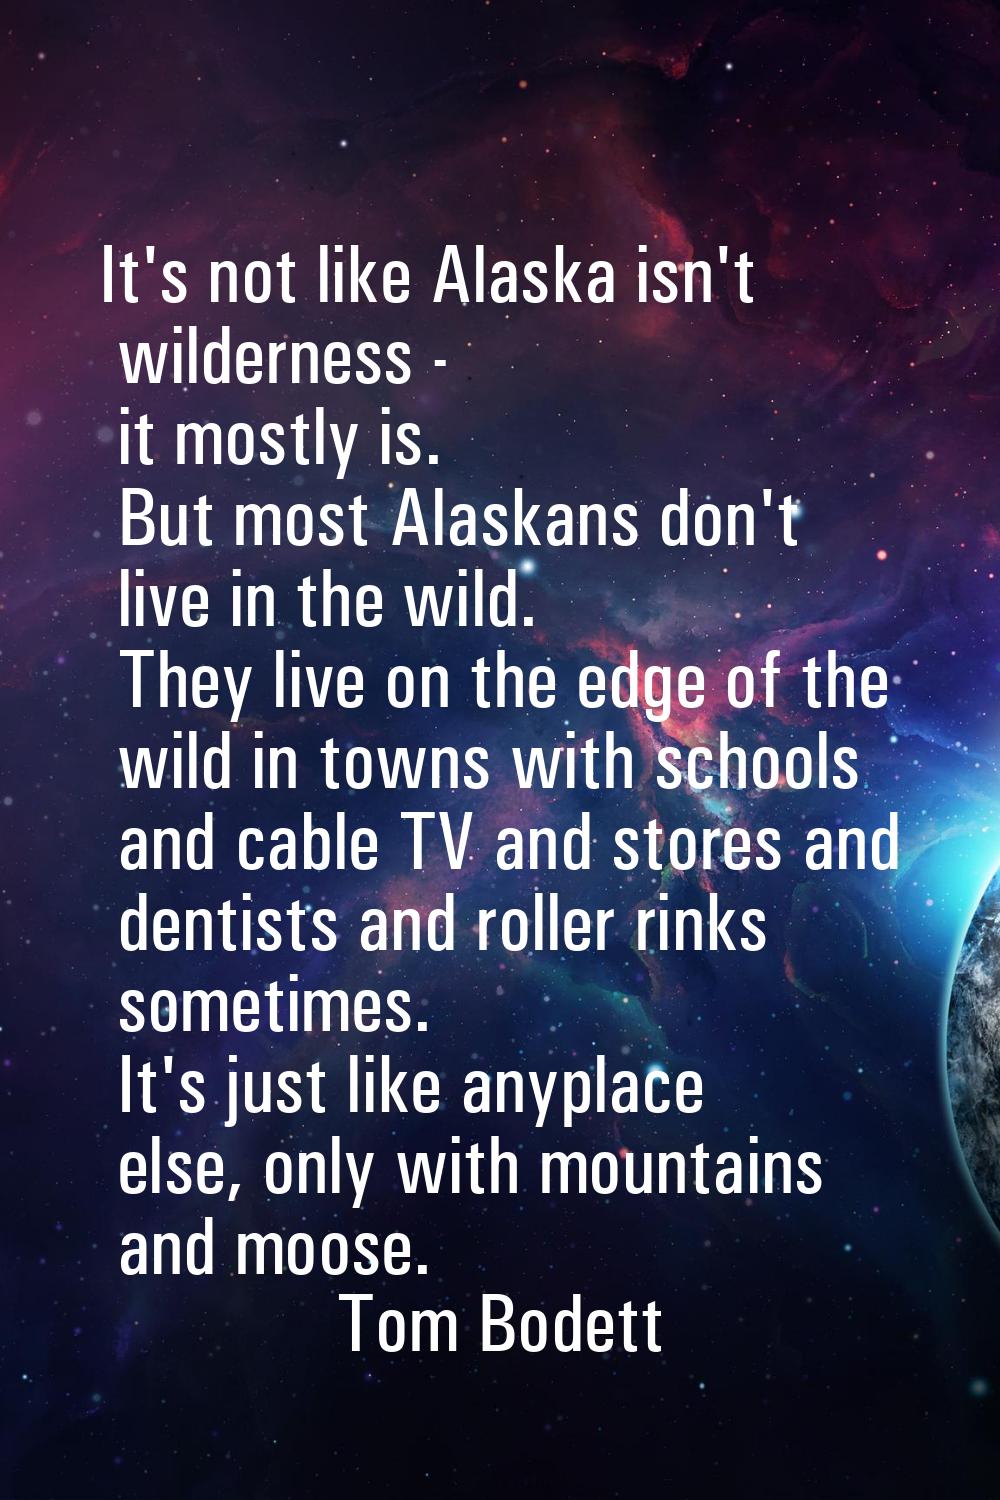 It's not like Alaska isn't wilderness - it mostly is. But most Alaskans don't live in the wild. The